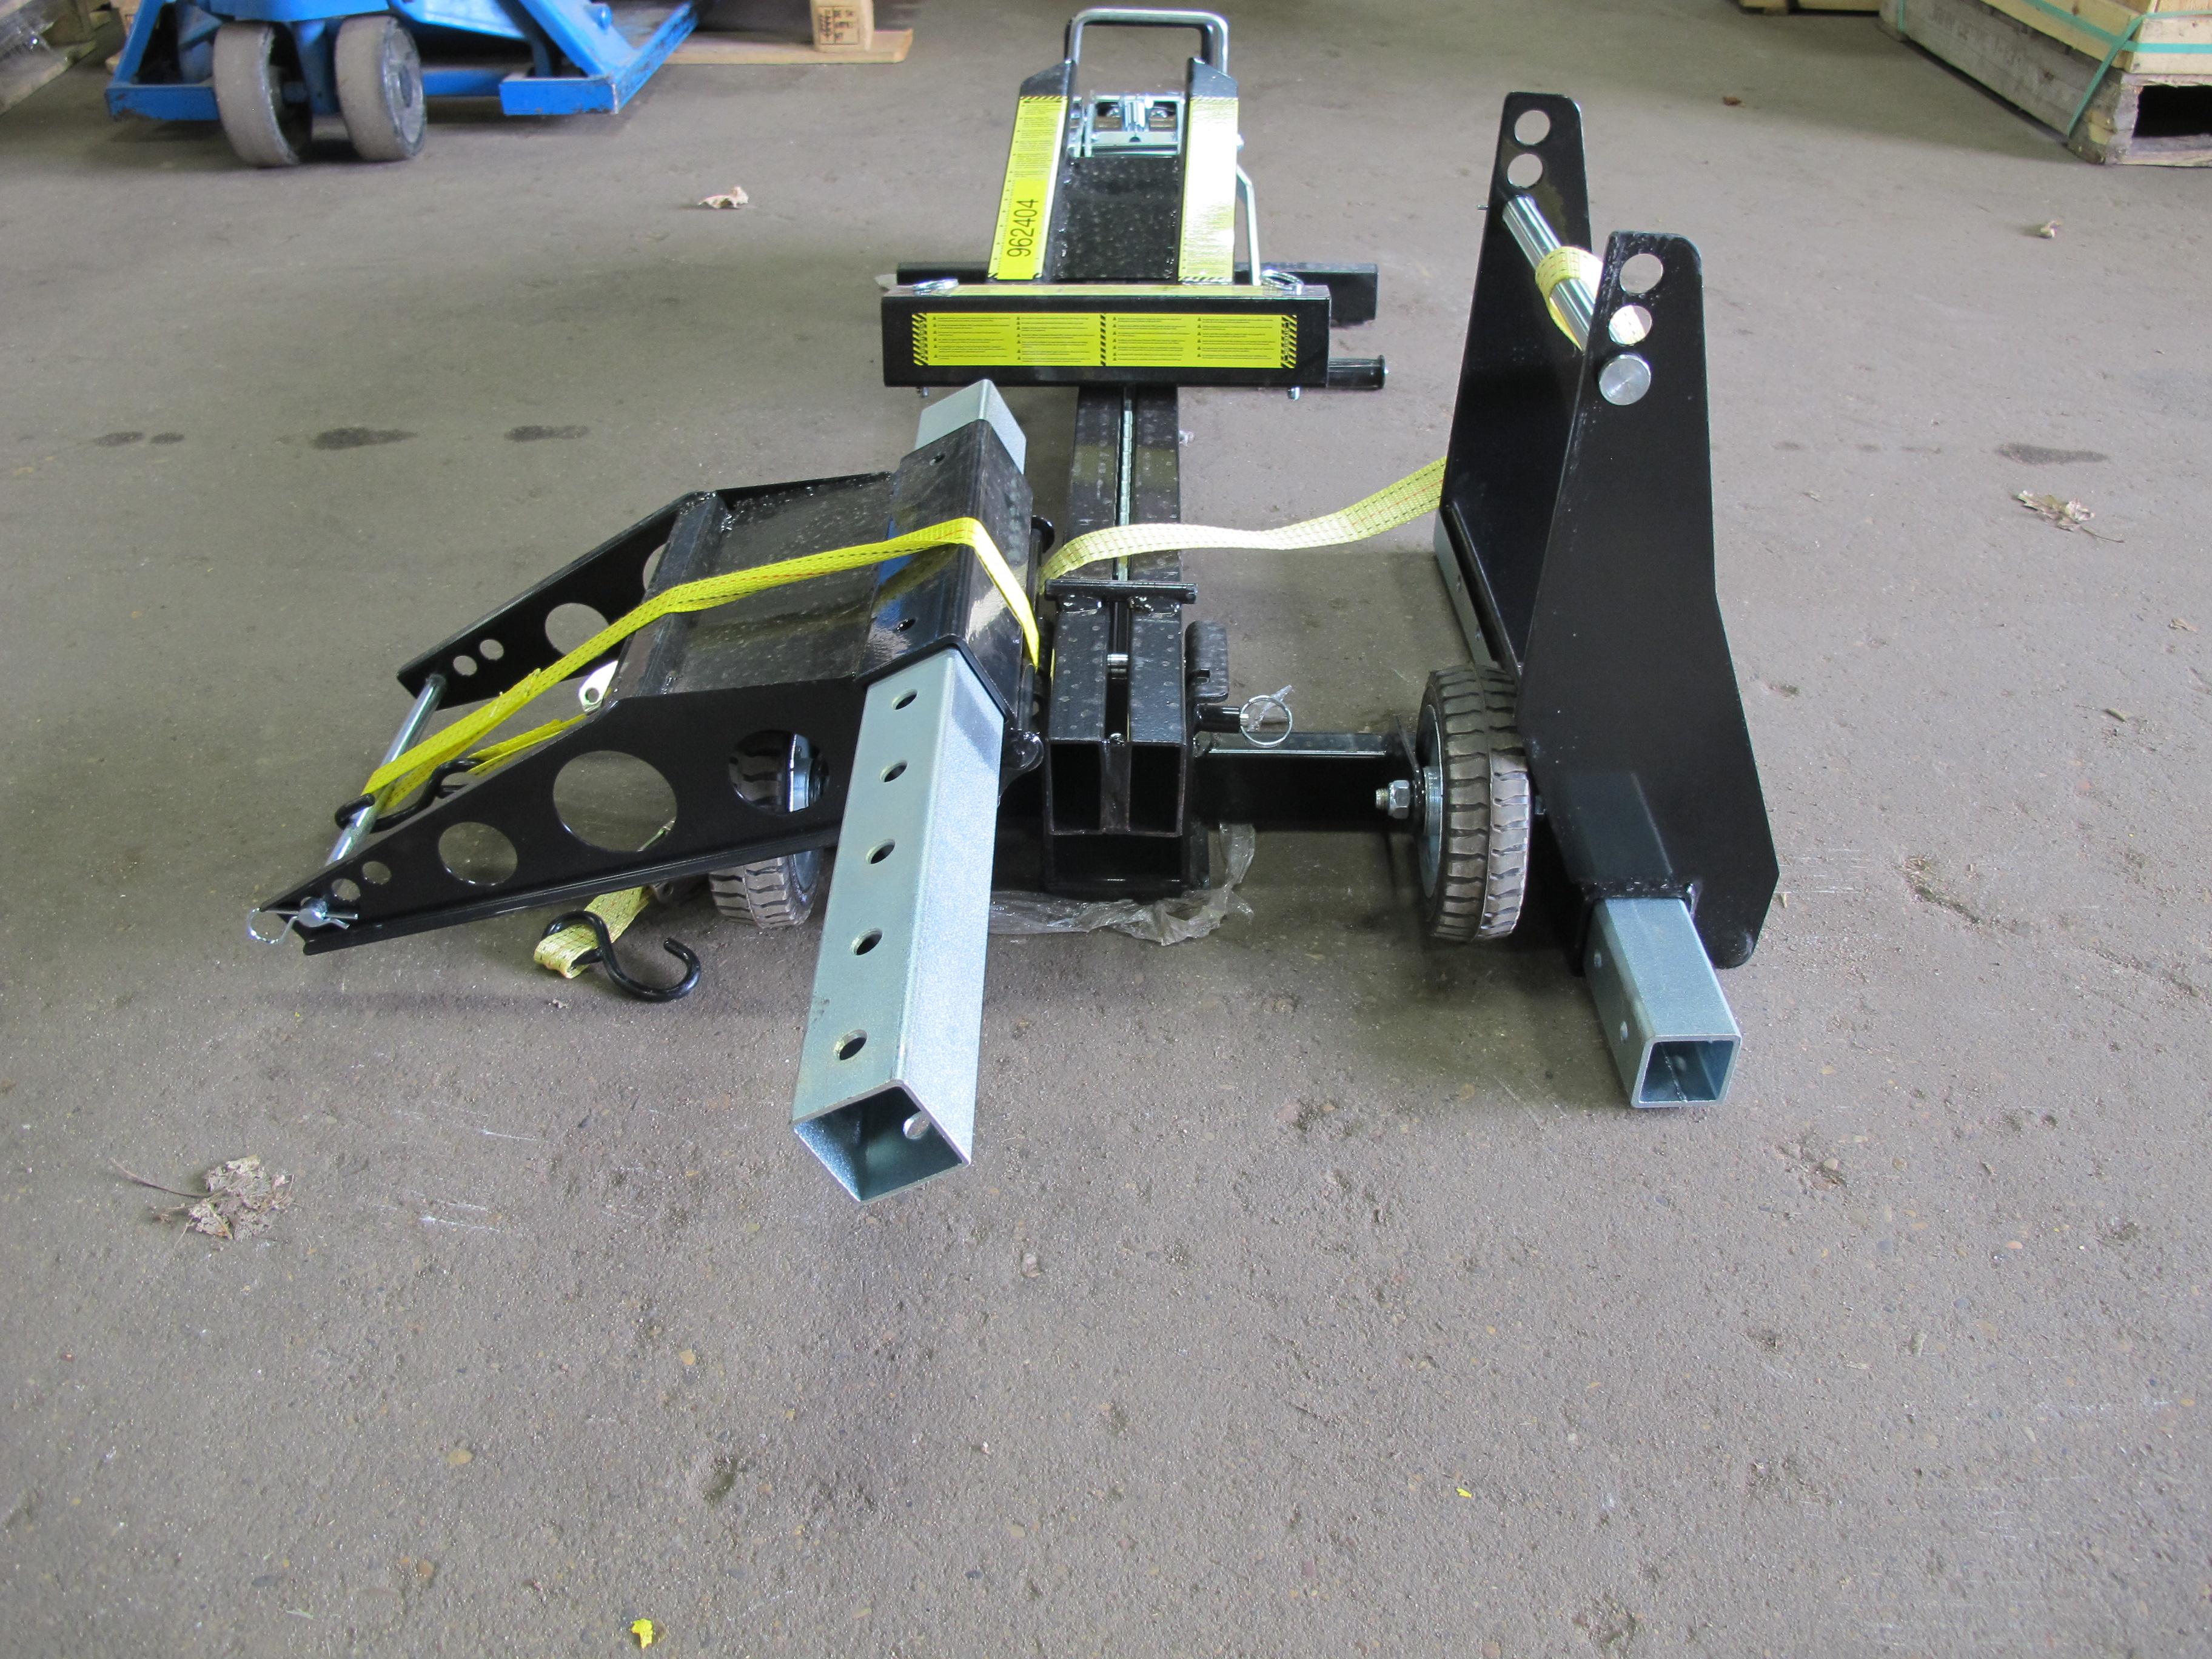 New MoJack Prolift system; holds up to 750lbs, 28inch lift